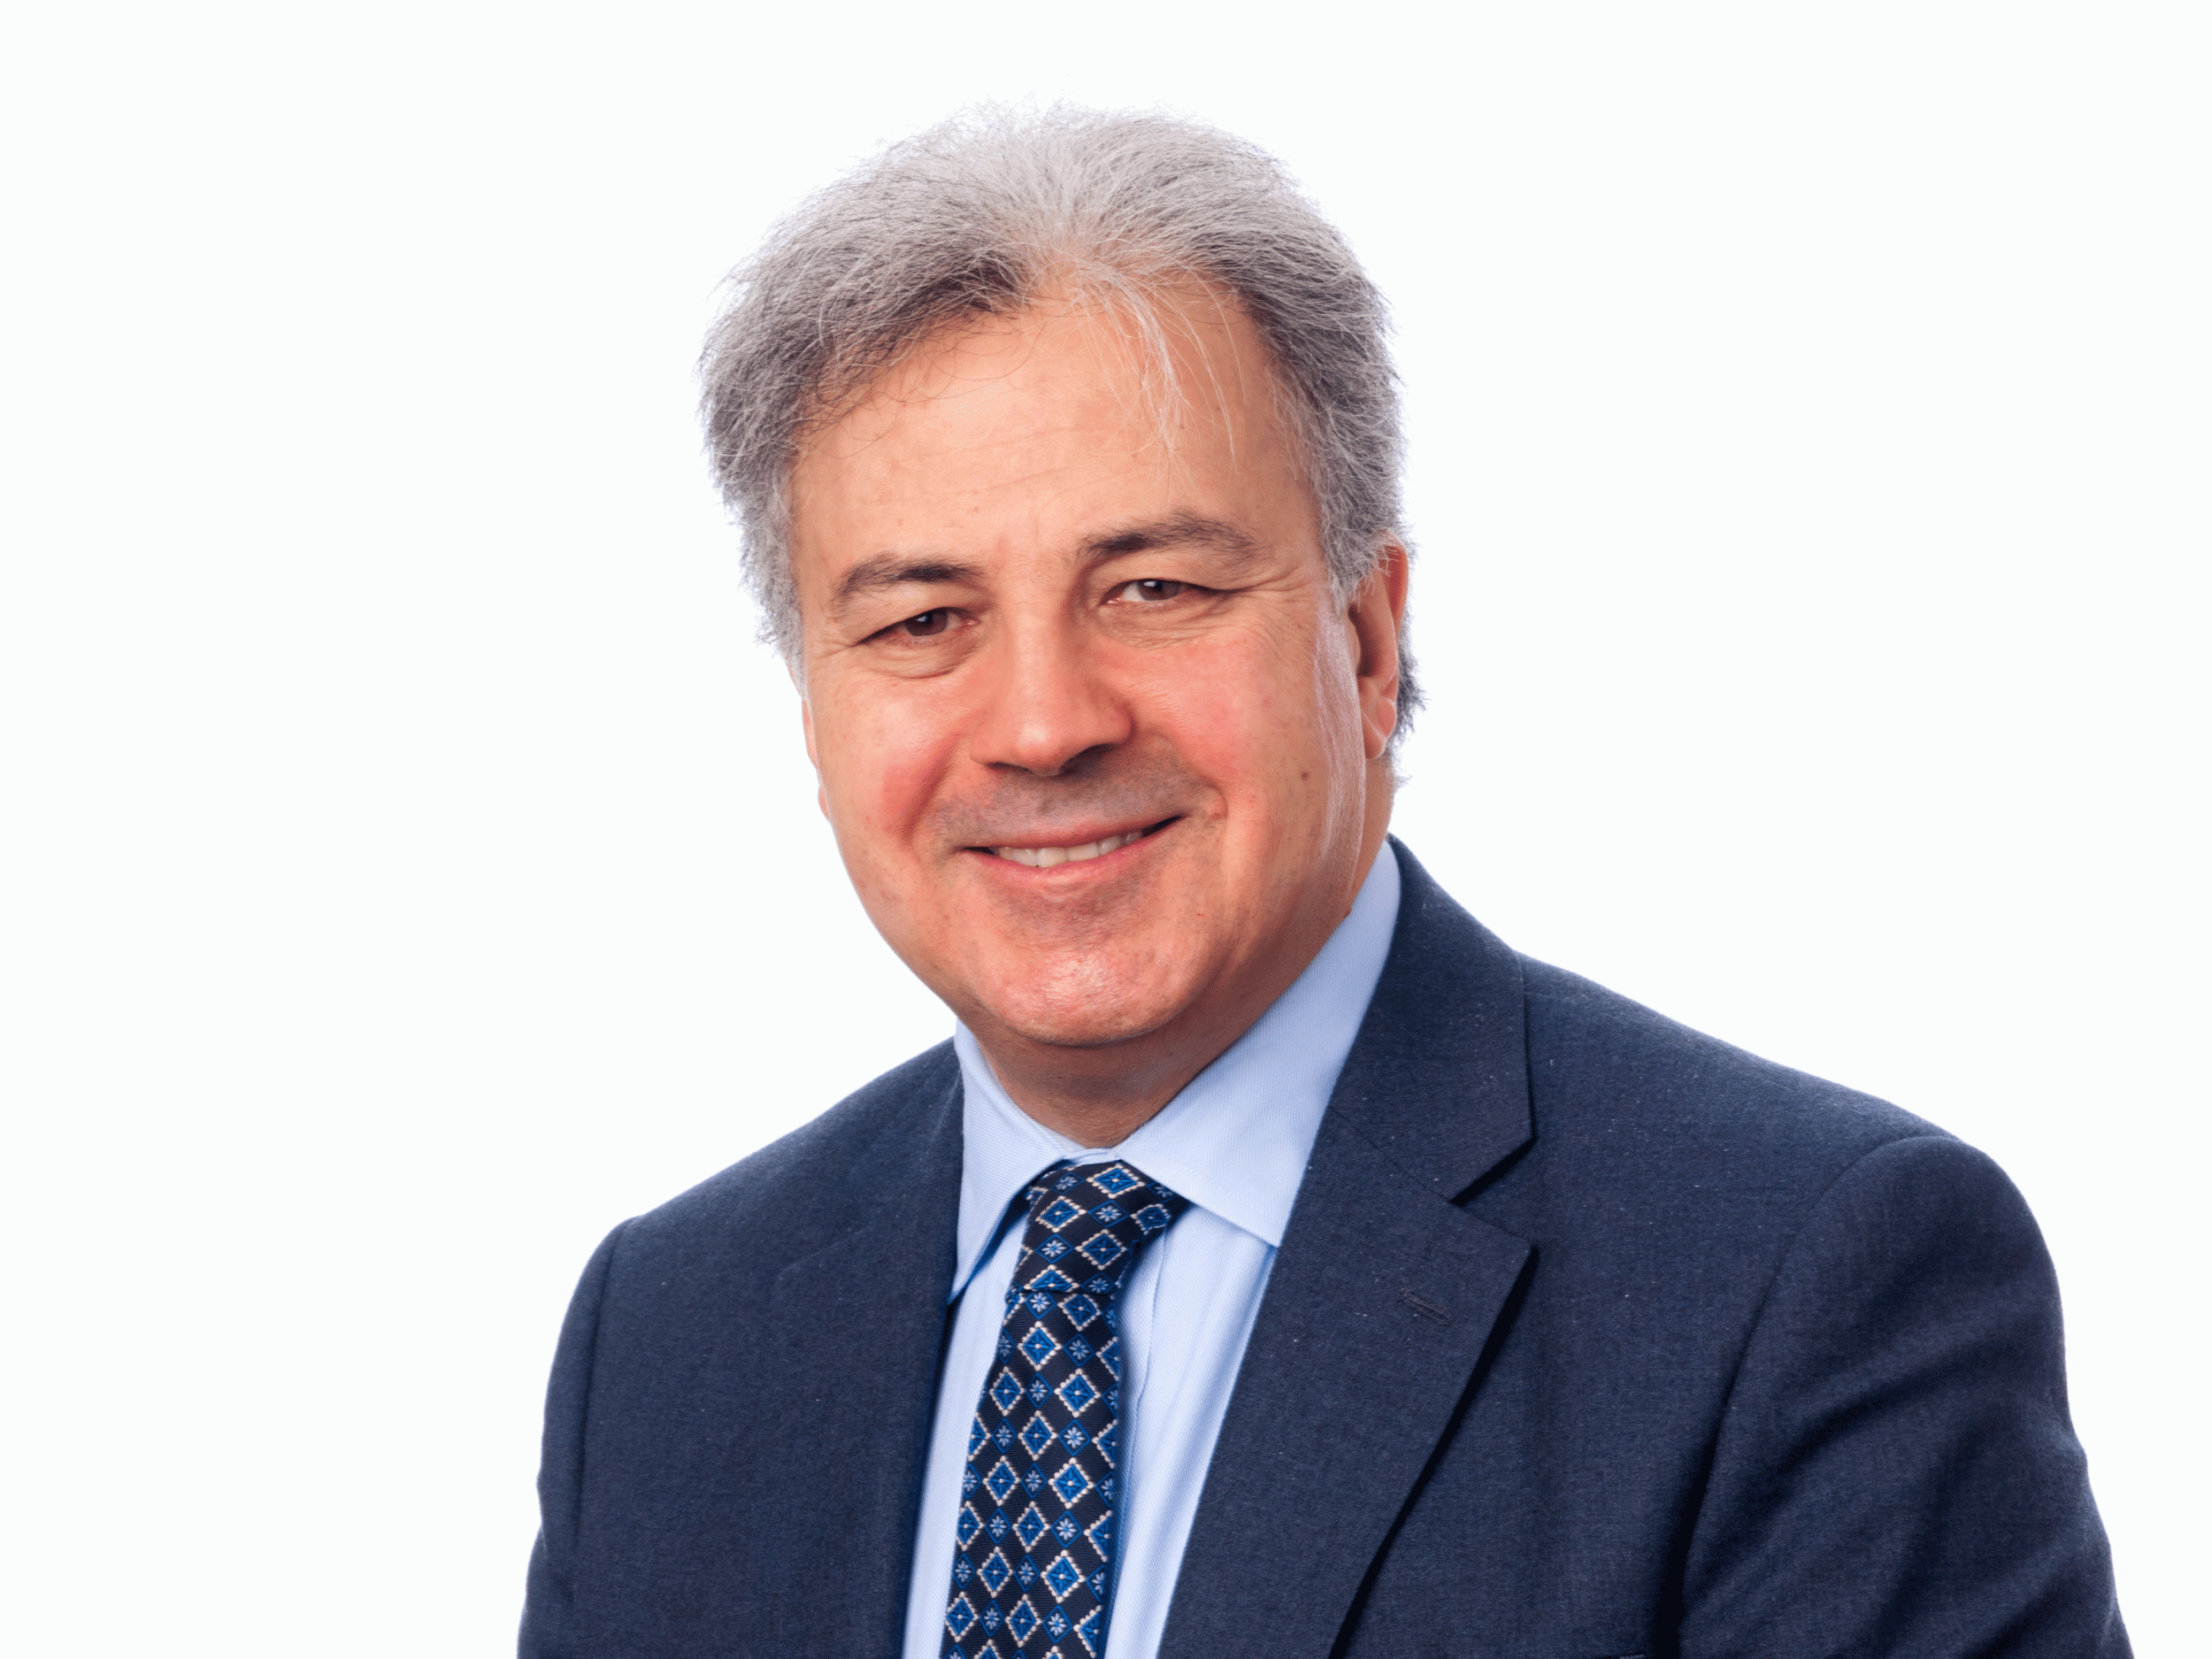 Professionally, Nusseibeh says, his main responsibility is to make the world a better place for those retiring